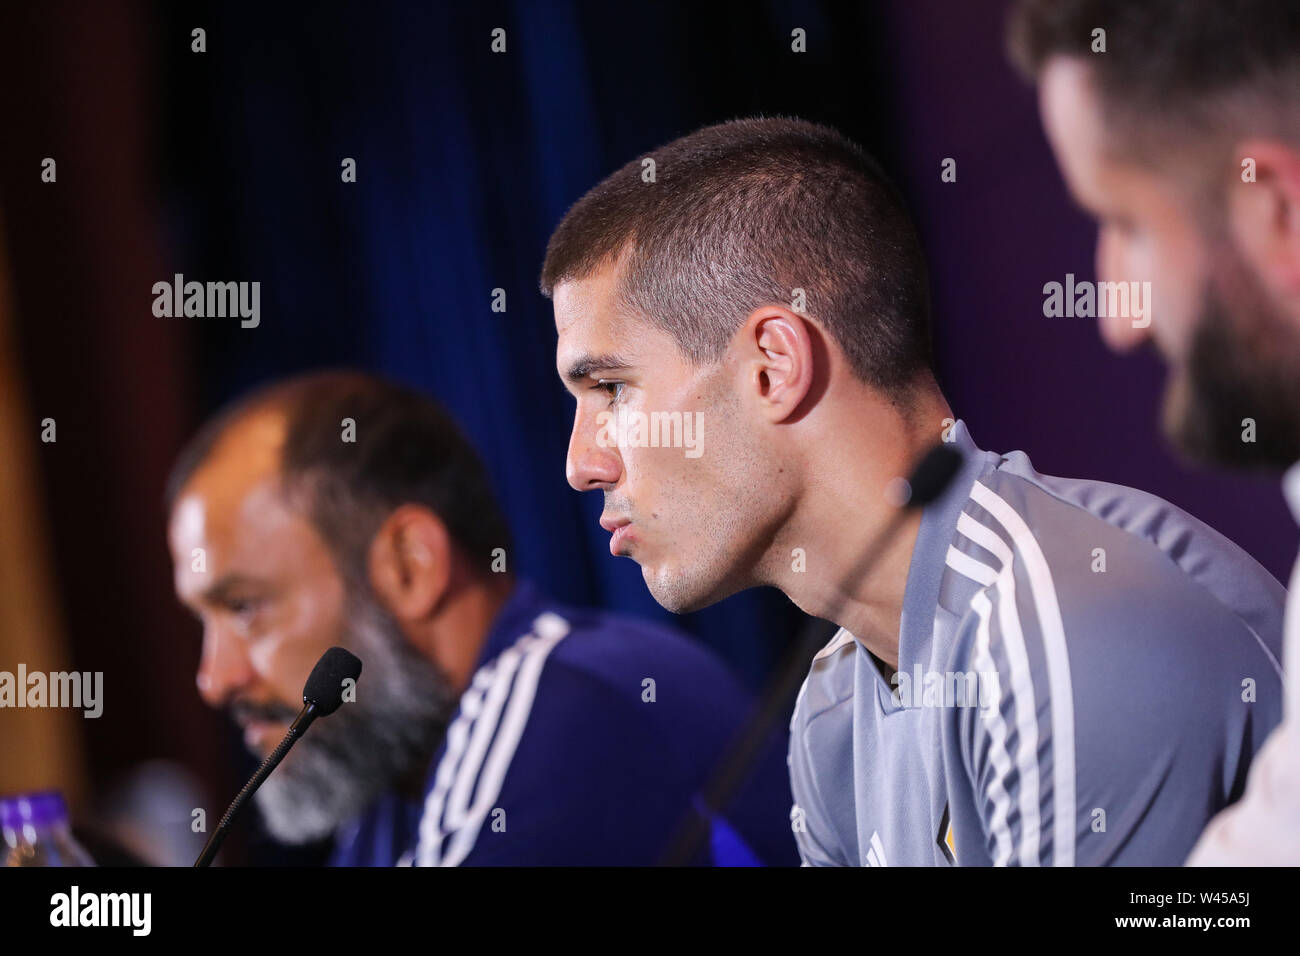 Conor Coady of Wolverhampton Wanderers F.C. of English League champions attends a press conference for the final match during the Premier League Asia Trophy 2019 against Manchester City F.C. in Shanghai, China, 19 July 2019. Stock Photo